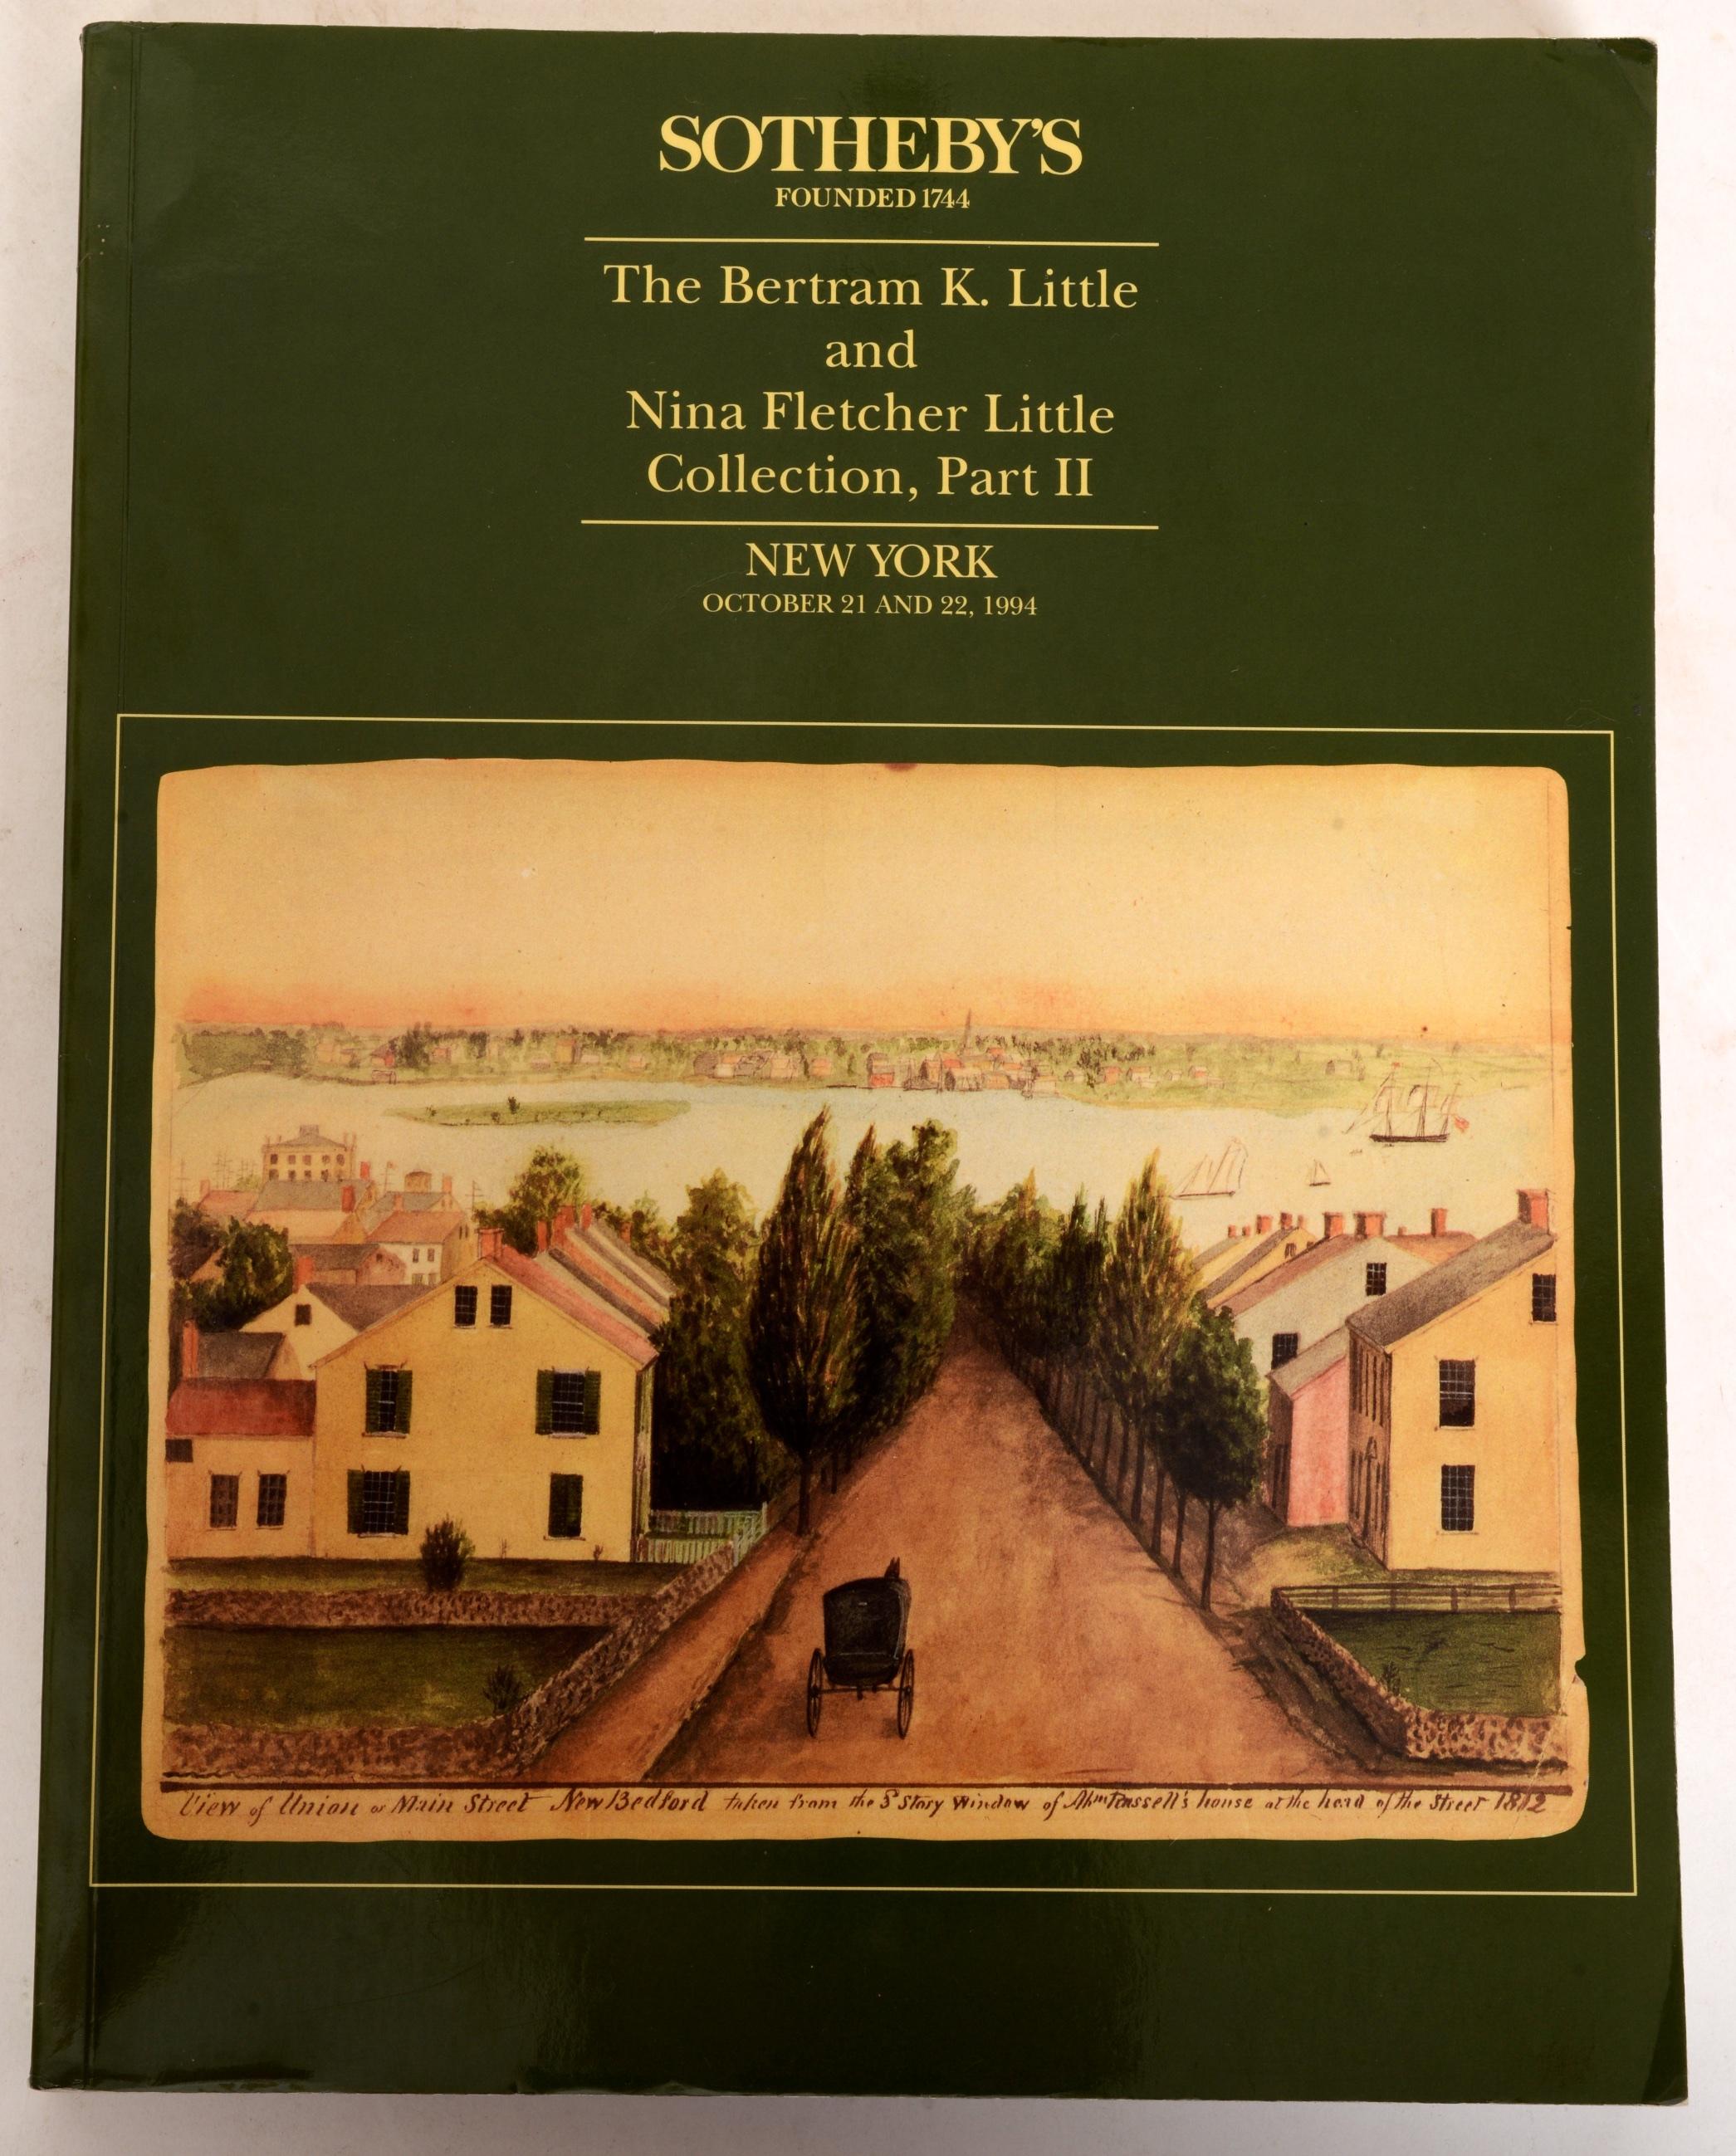 Sotheby's: The Bertram K. Little and Nina Fletcher Little Collection, Parts I & II October 21 and 22, 1994. Softcover. The sale consisted of the Little's Americana collection. Introductory essay is by Wendell Garrett. Volume 1: 457 lots. Volume 2: